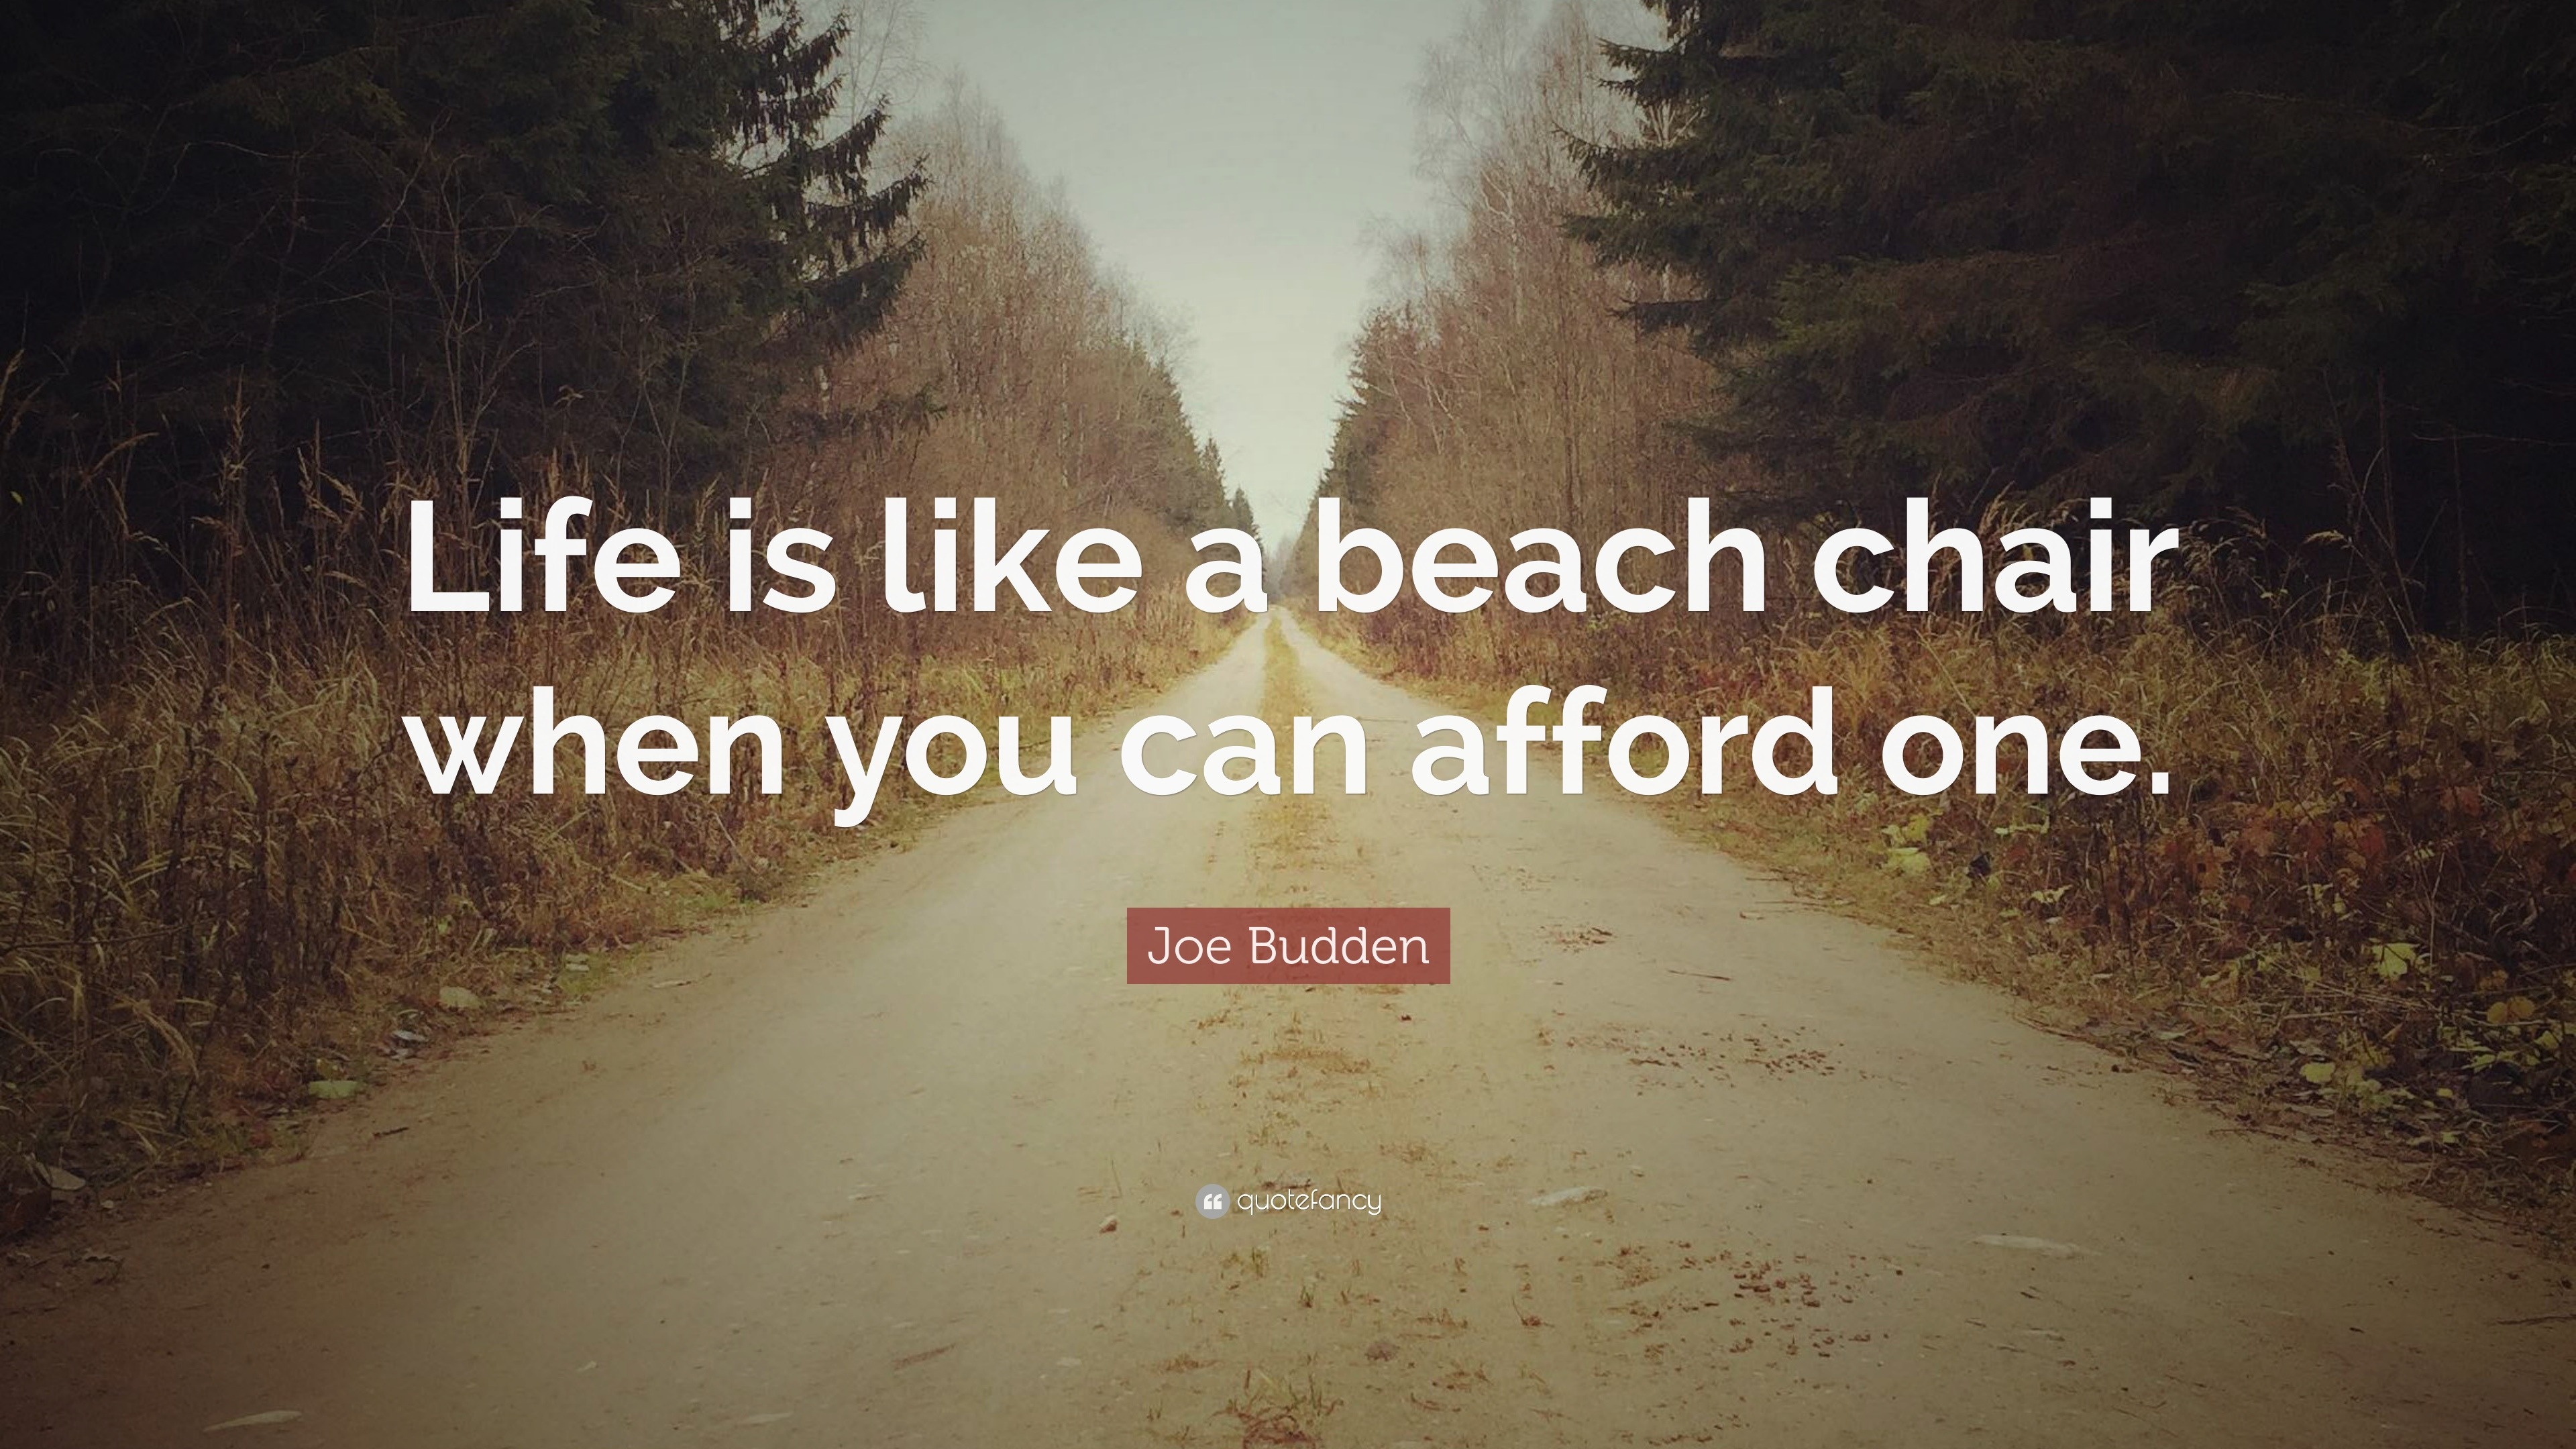 Joe Budden Quote Life Is Like A Beach Chair When You Can Afford